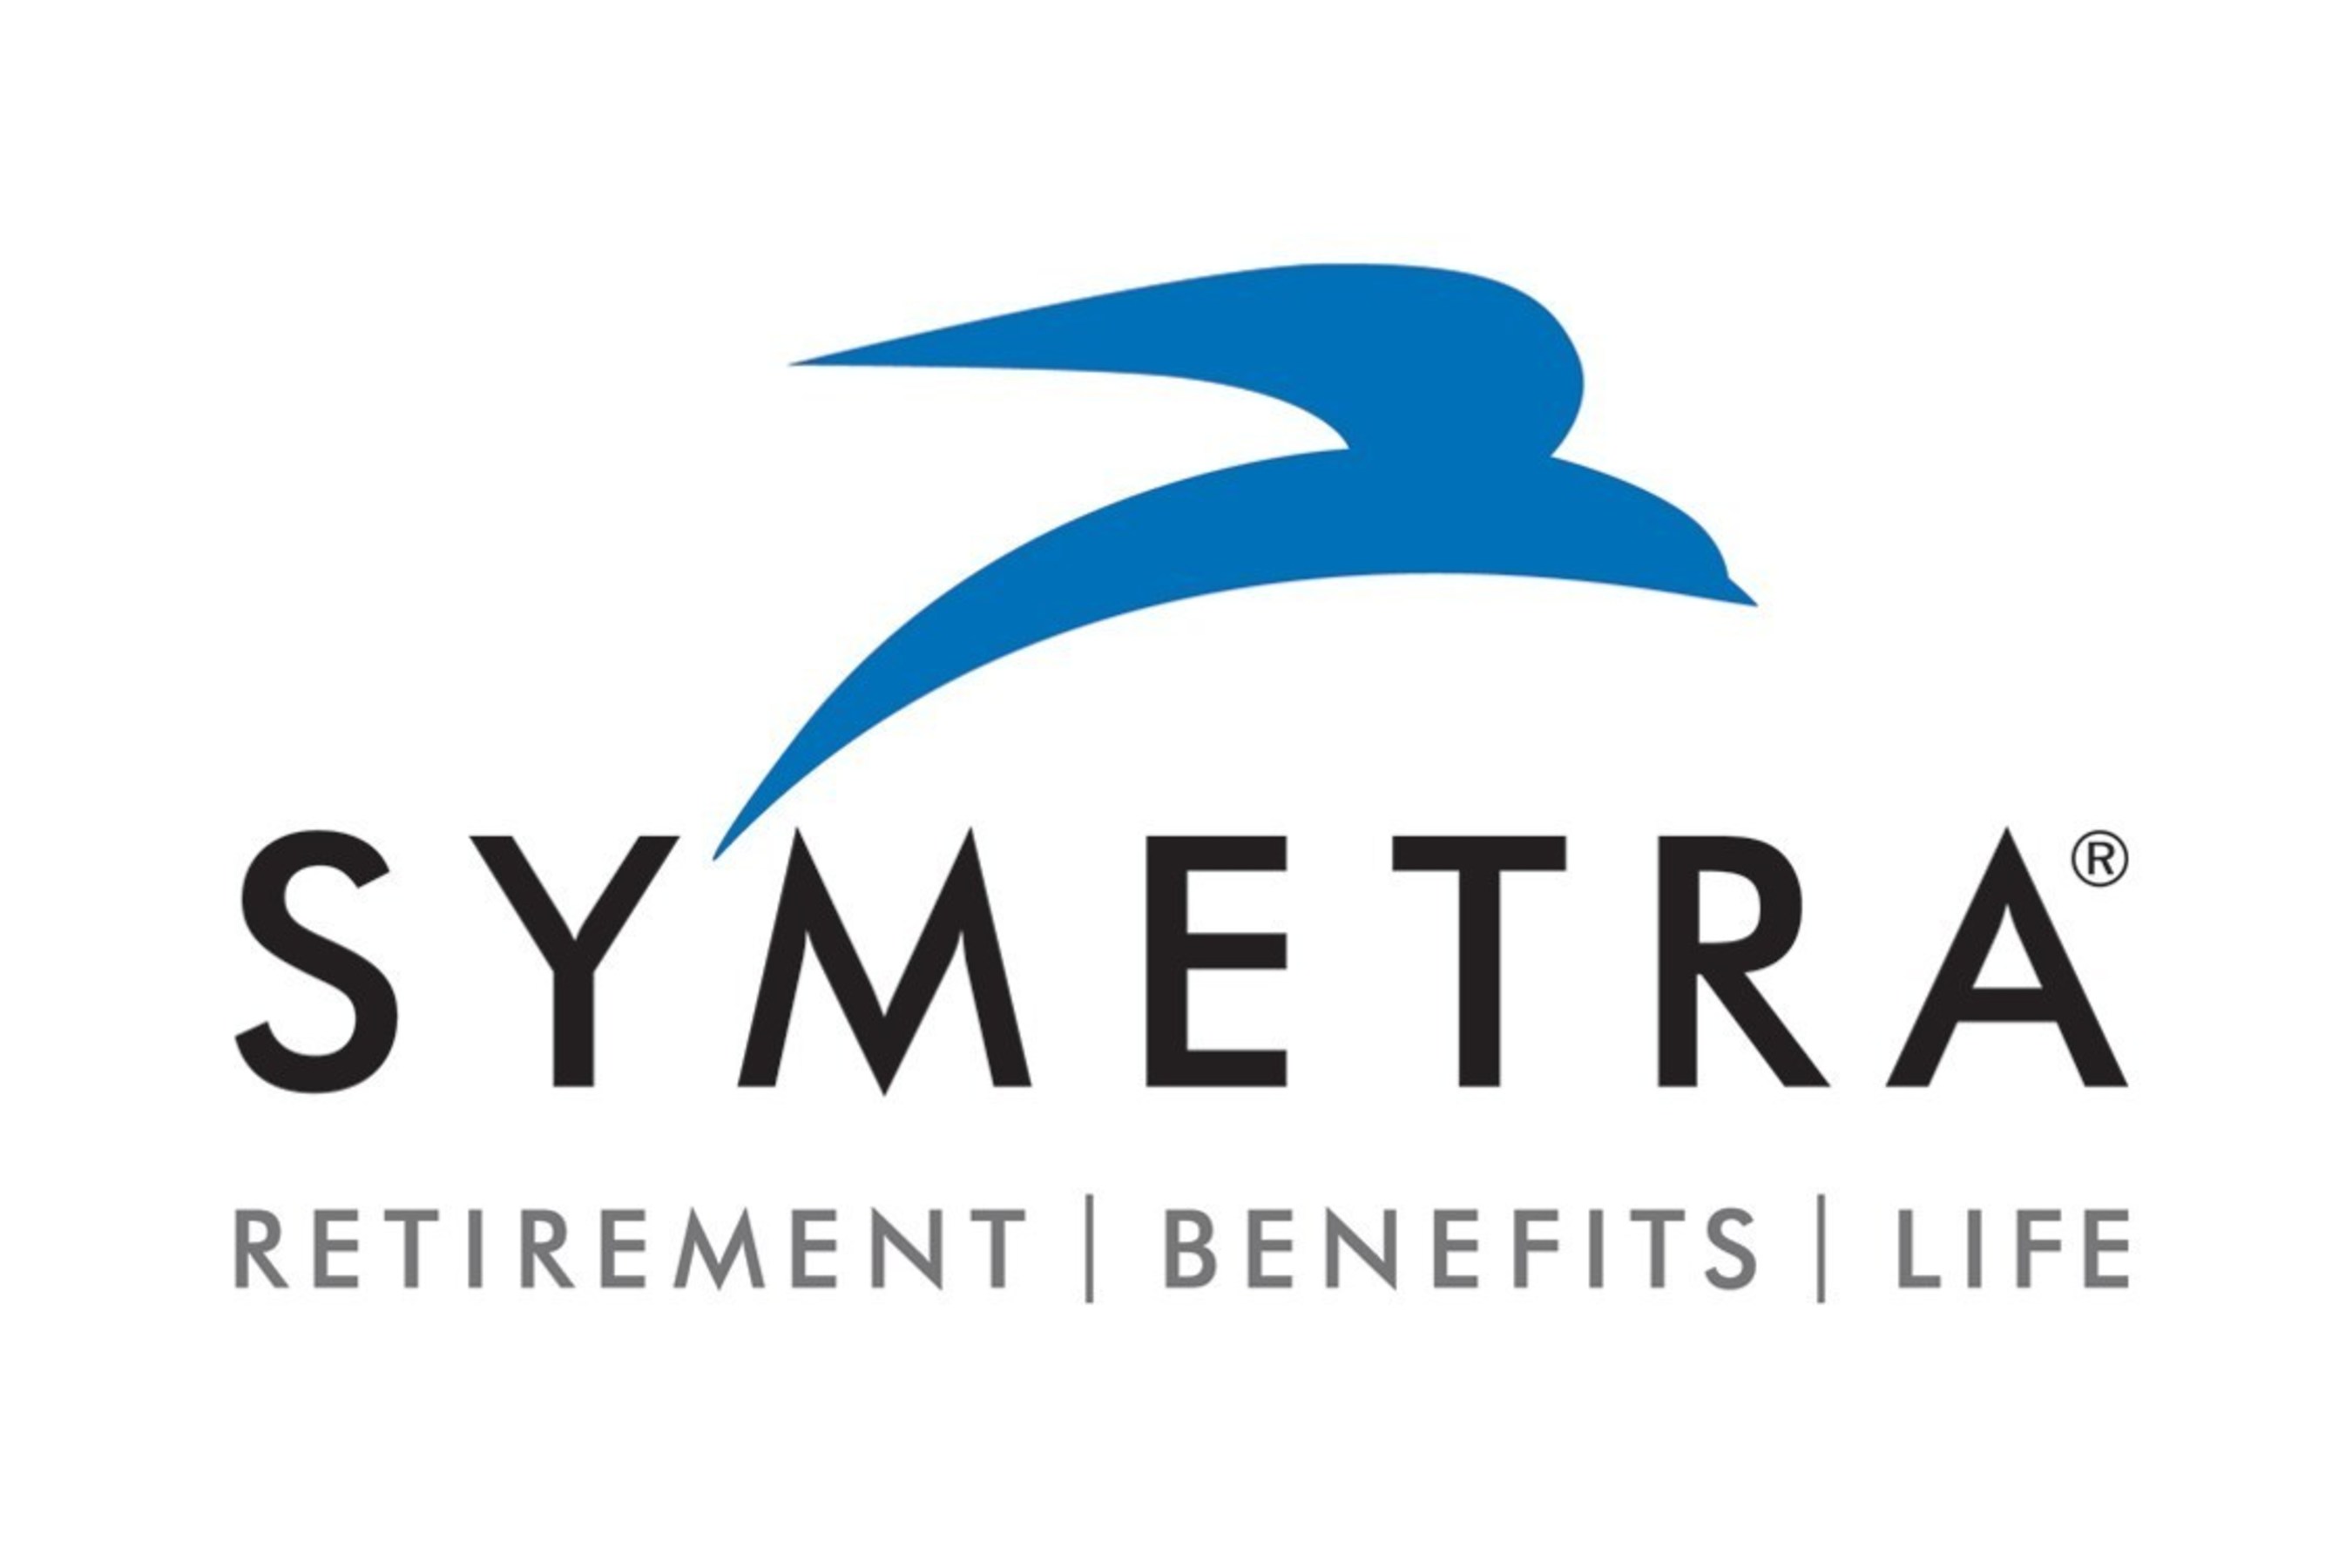 Premera and Symetra Collaborate to Offer Added Benefits and Value for